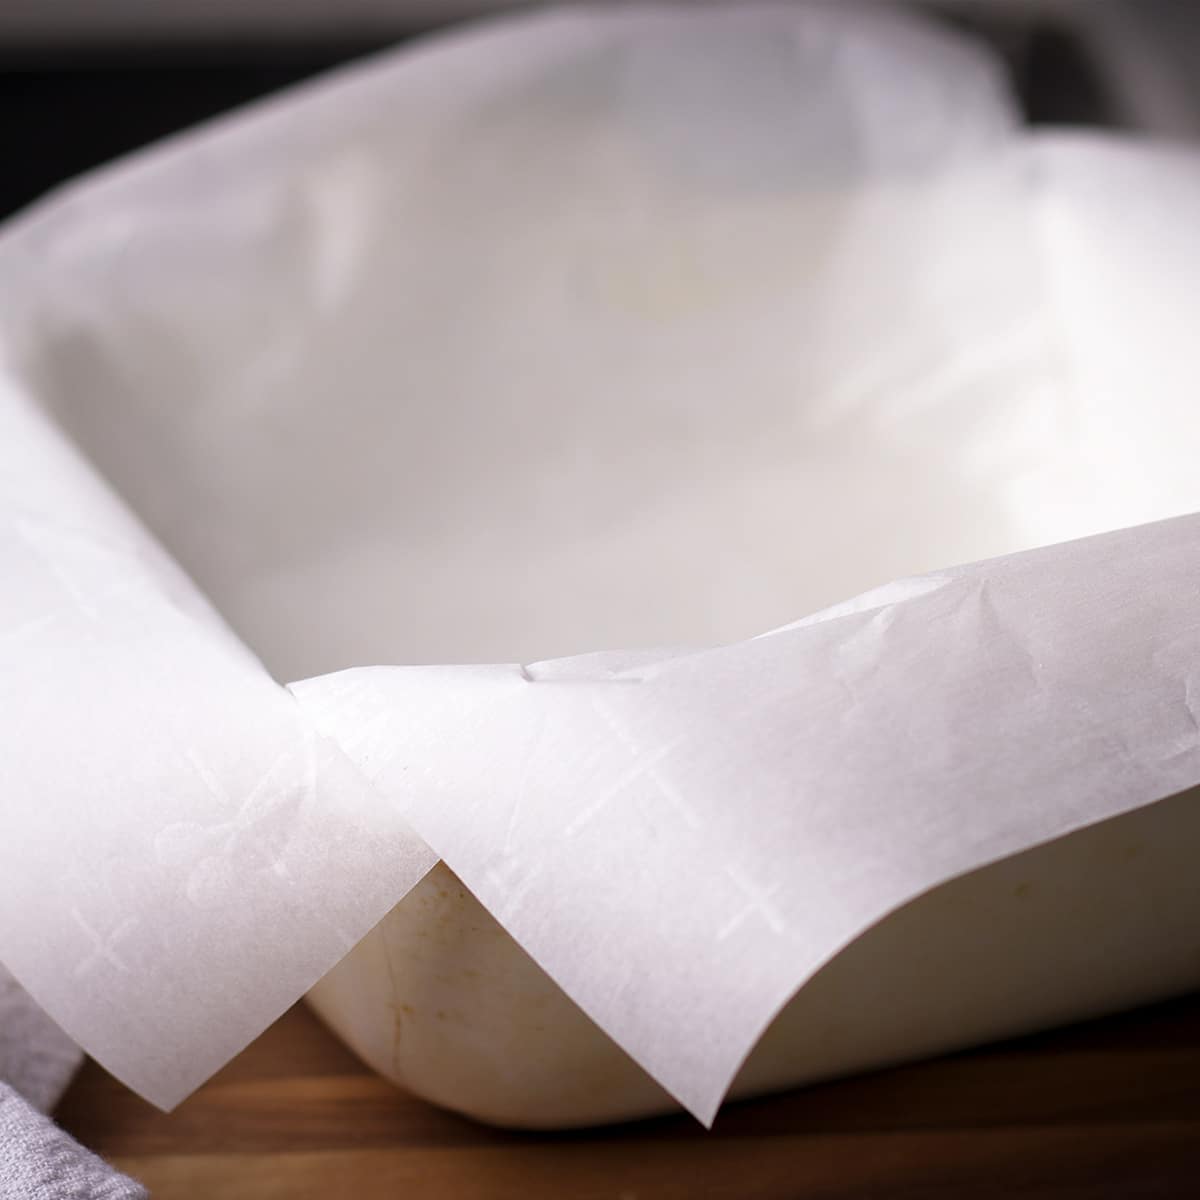 A baking dish that's been lined with parchment paper.